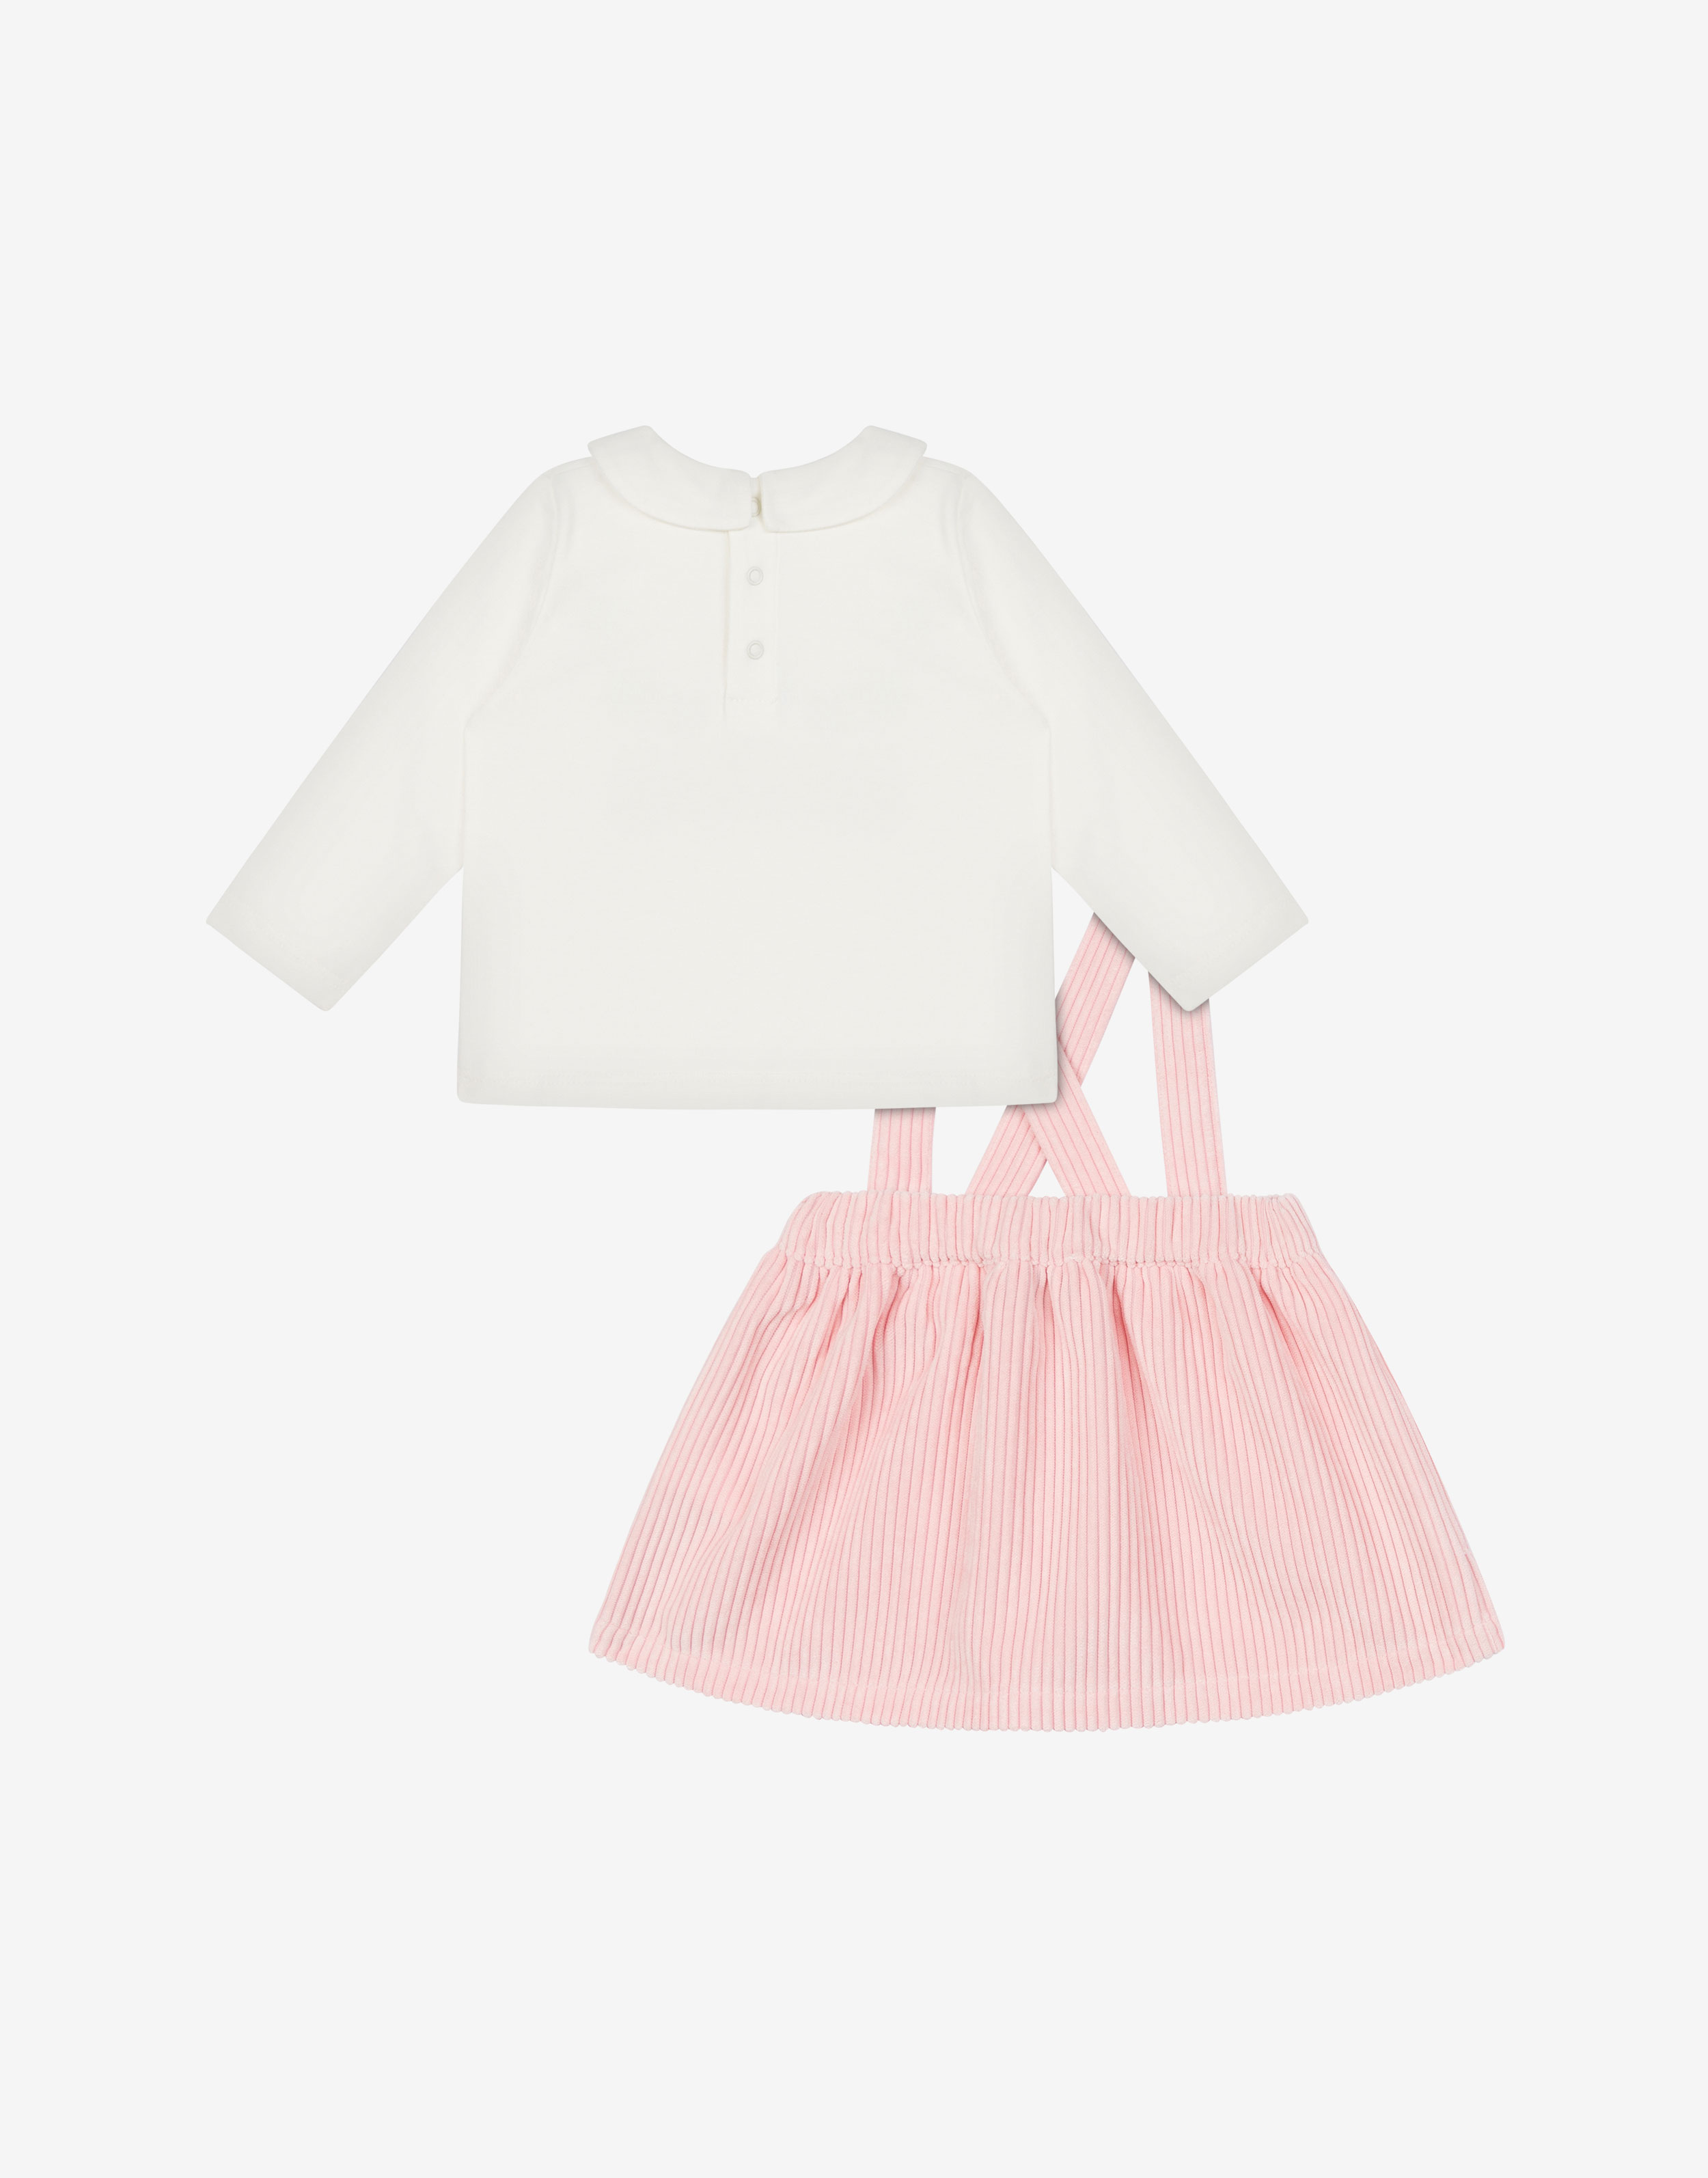 Teddy Balloons t-shirt and dungaree skirt co-ord set | Moschino